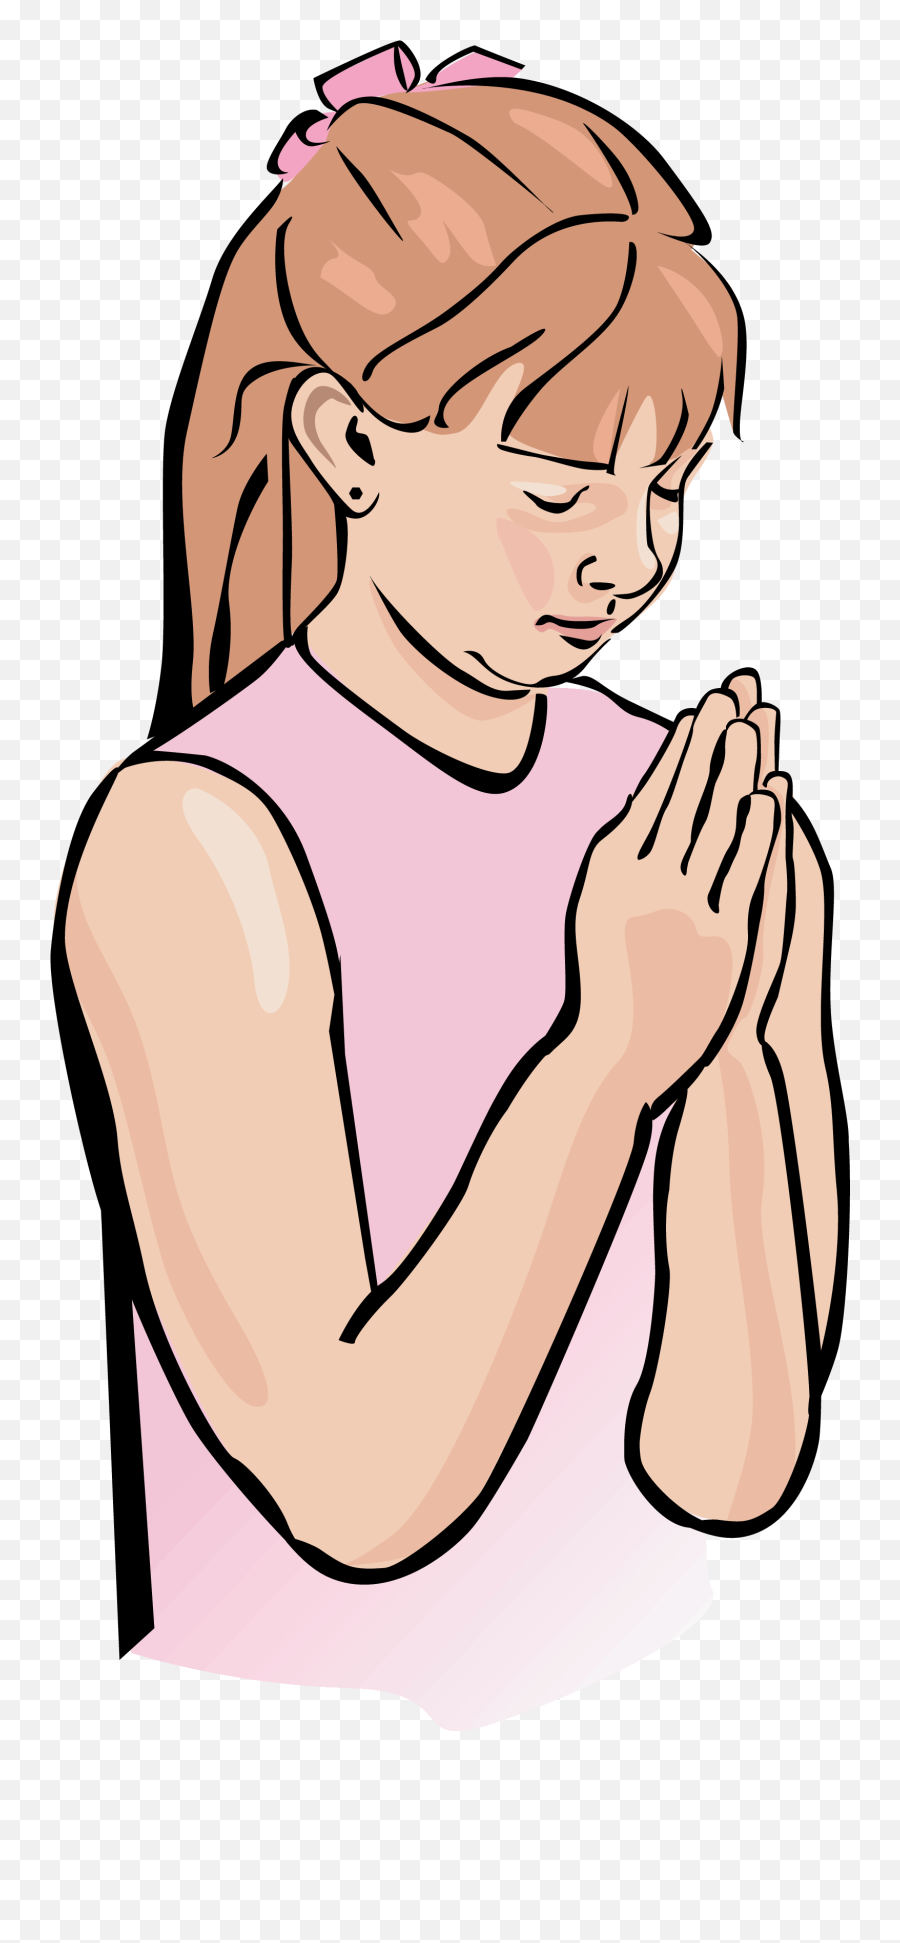 Download Child Prayer Images Png Image Clipart Free - Pray Clipart,Prayer Png